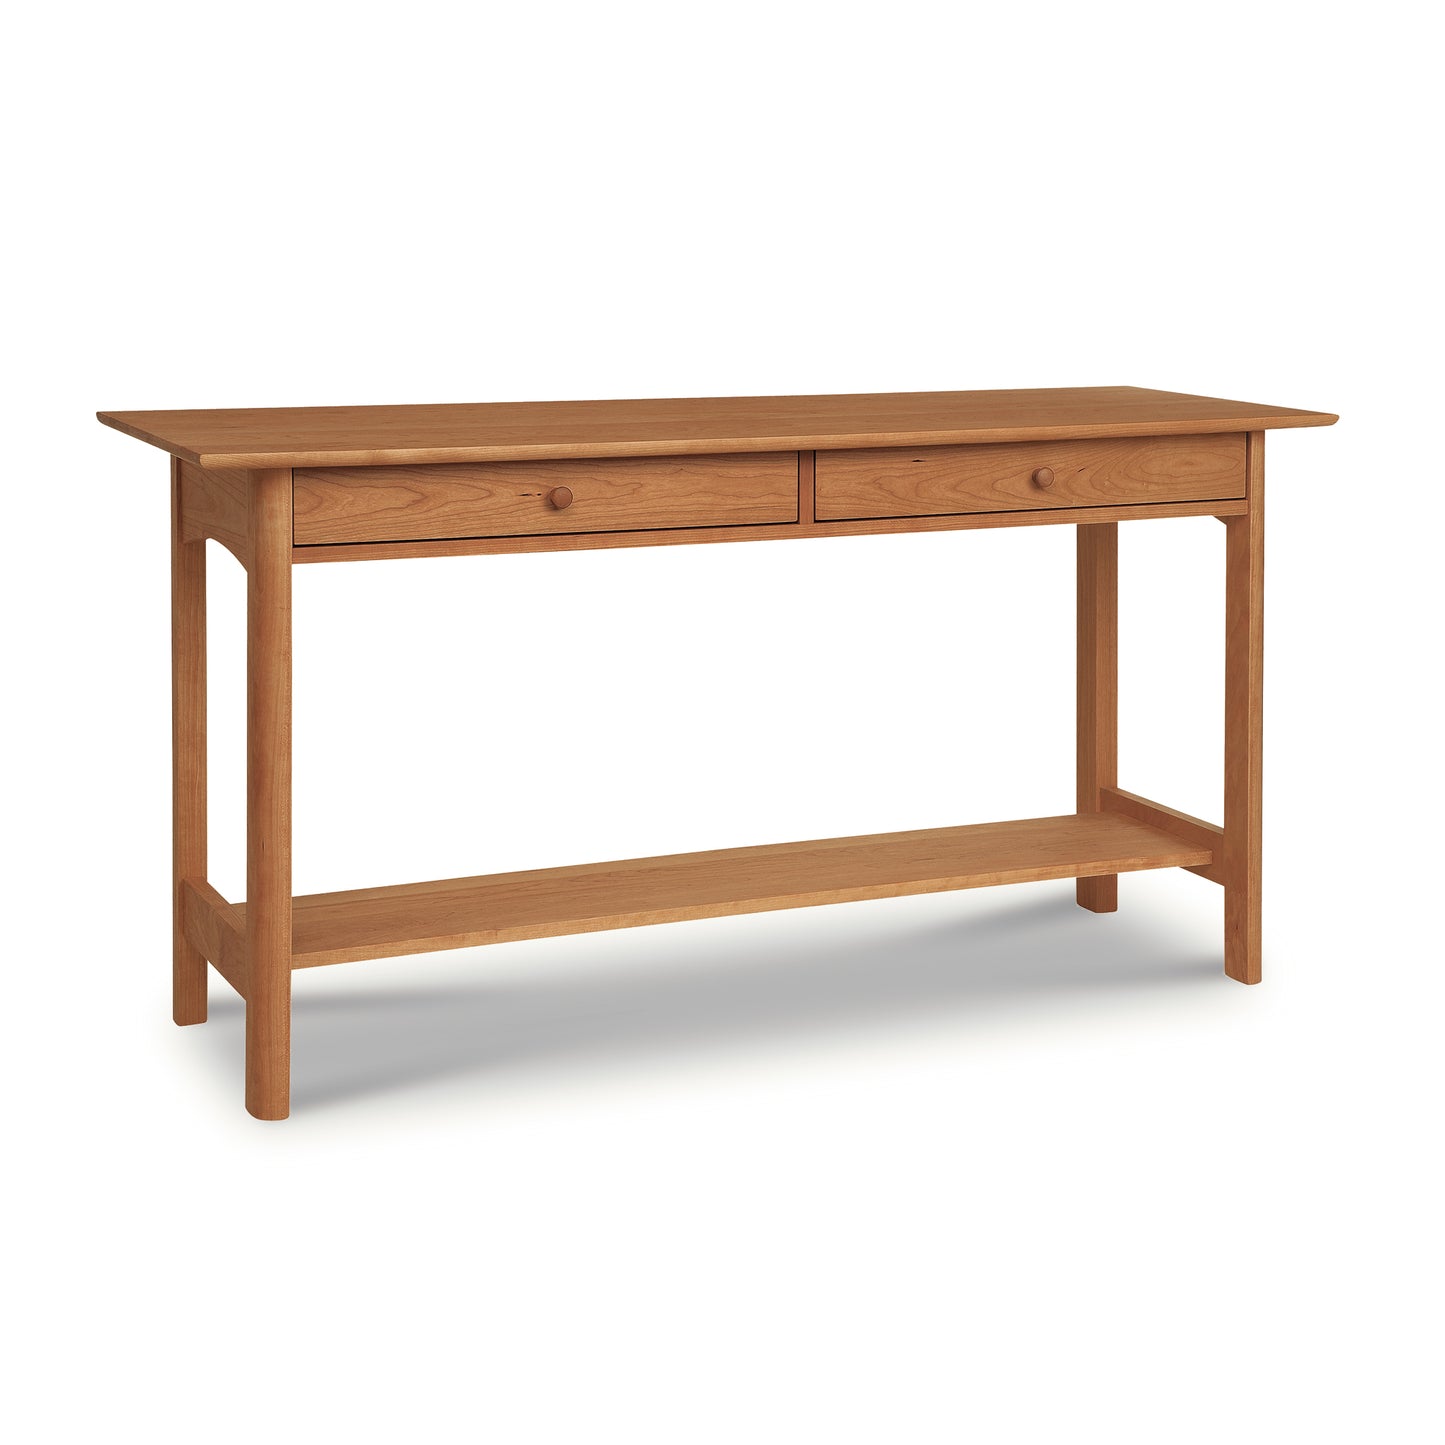 A Heartwood Shaker 2-Drawer Console Table by Vermont Furniture Designs with two drawers on a plain background, featuring an eco-friendly oil finish.